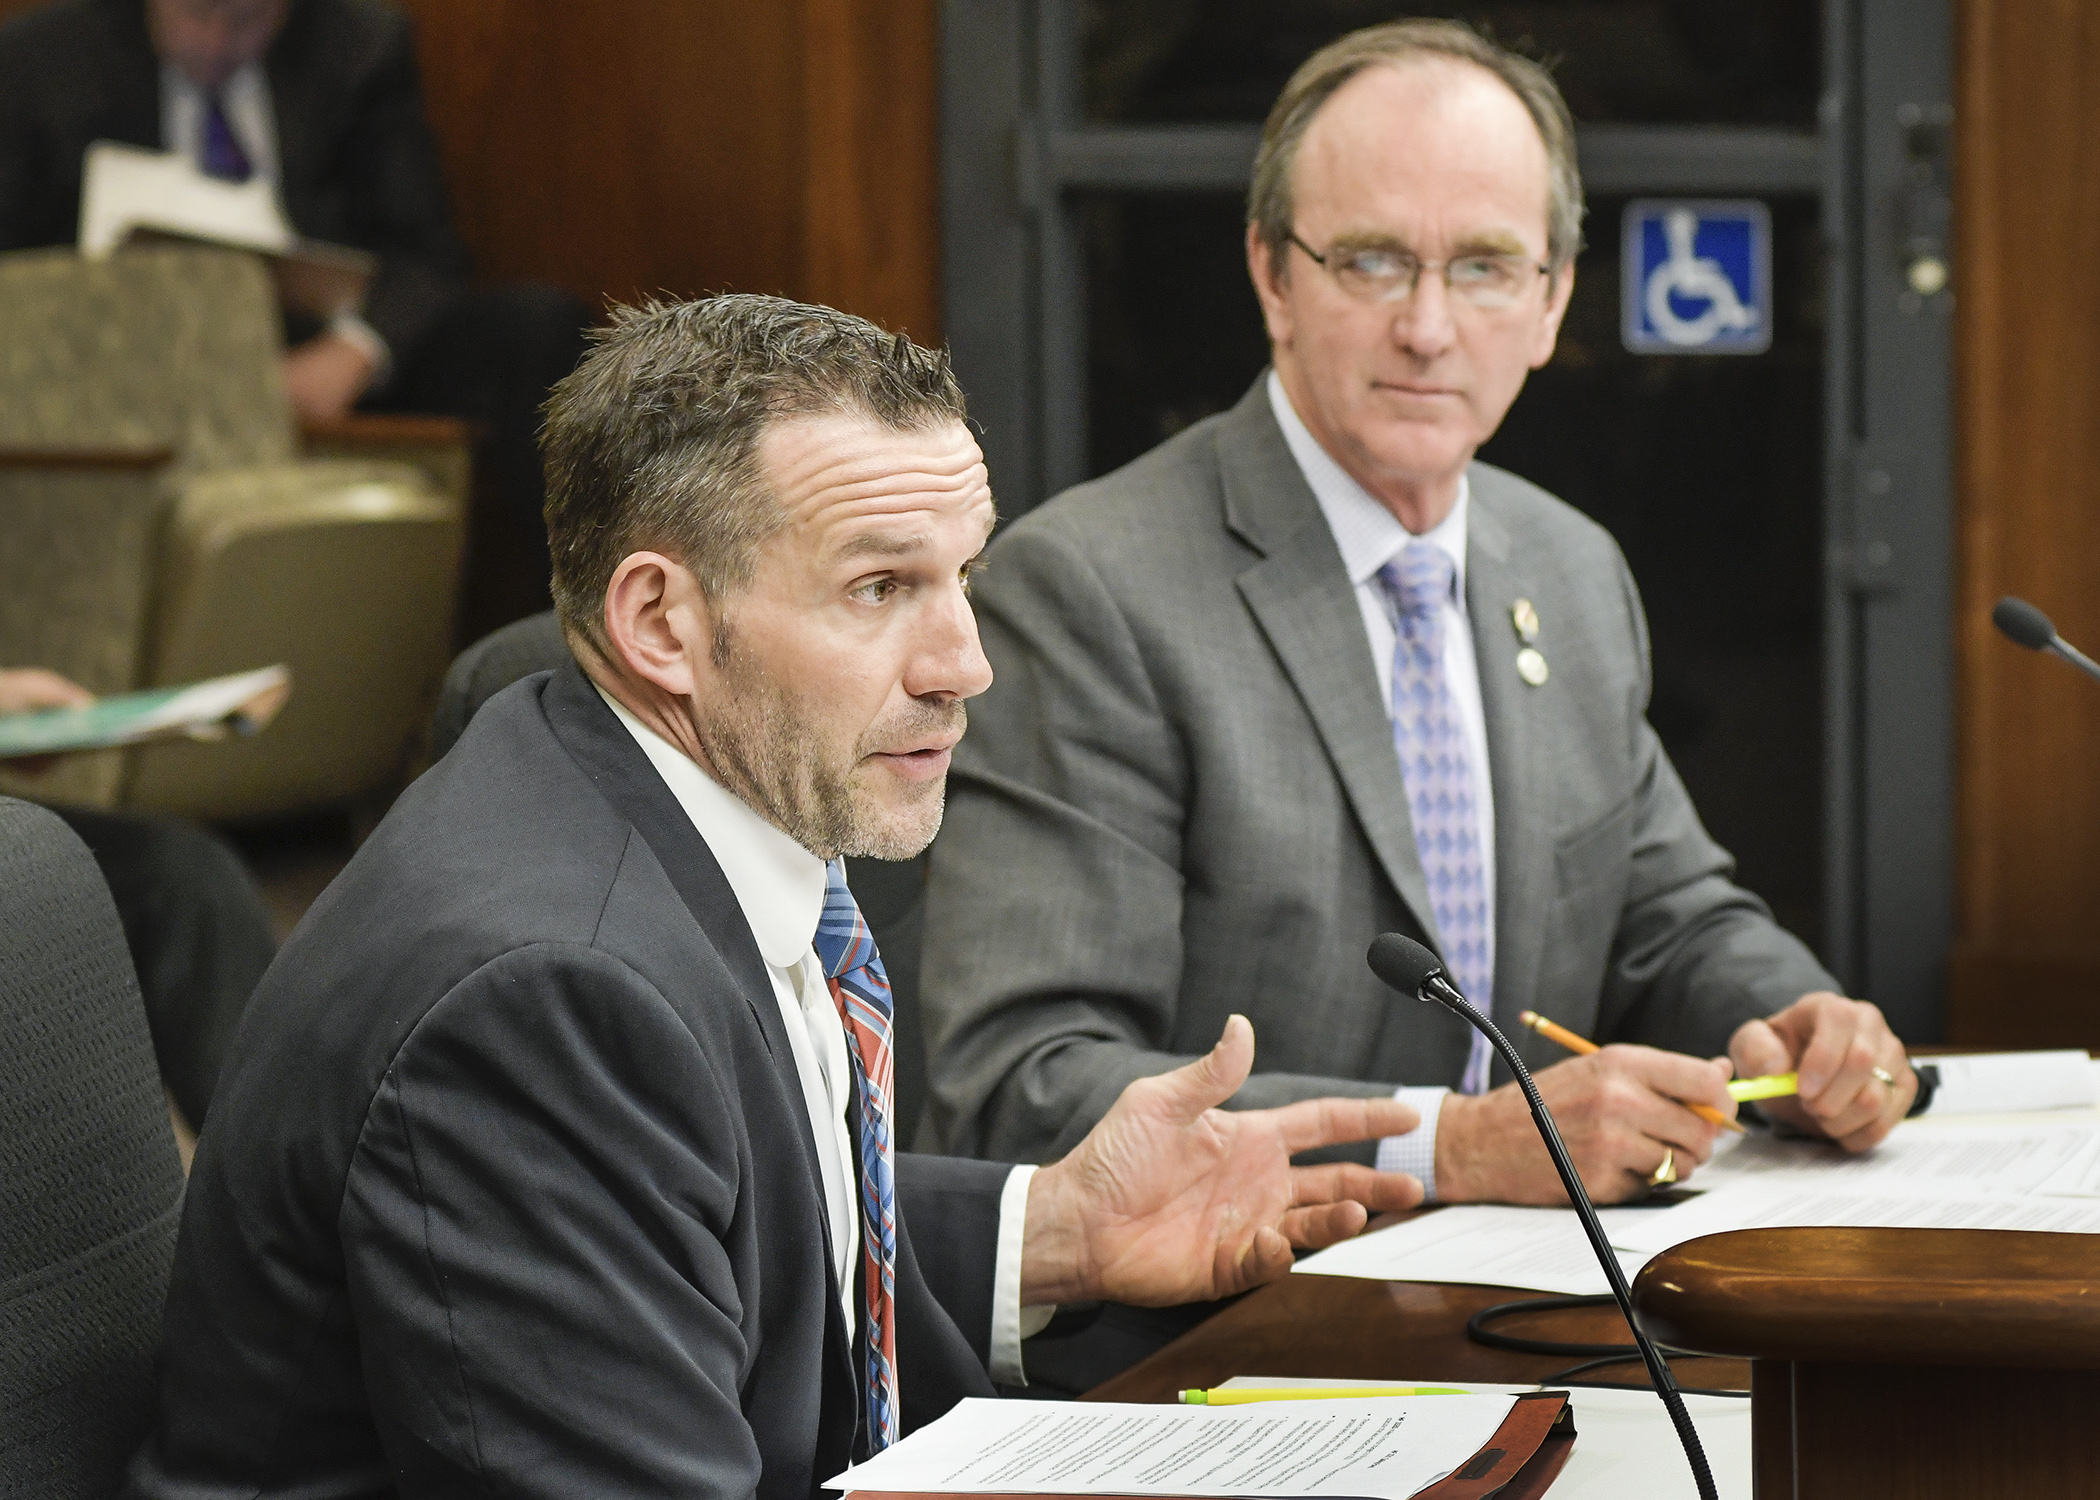 City of Lakes Land Trust Executive Director Jeff Washburne, left, testifies before the House Job Growth and Energy Affordability Policy and Finance Committee March 6. Photo by Andrew VonBank